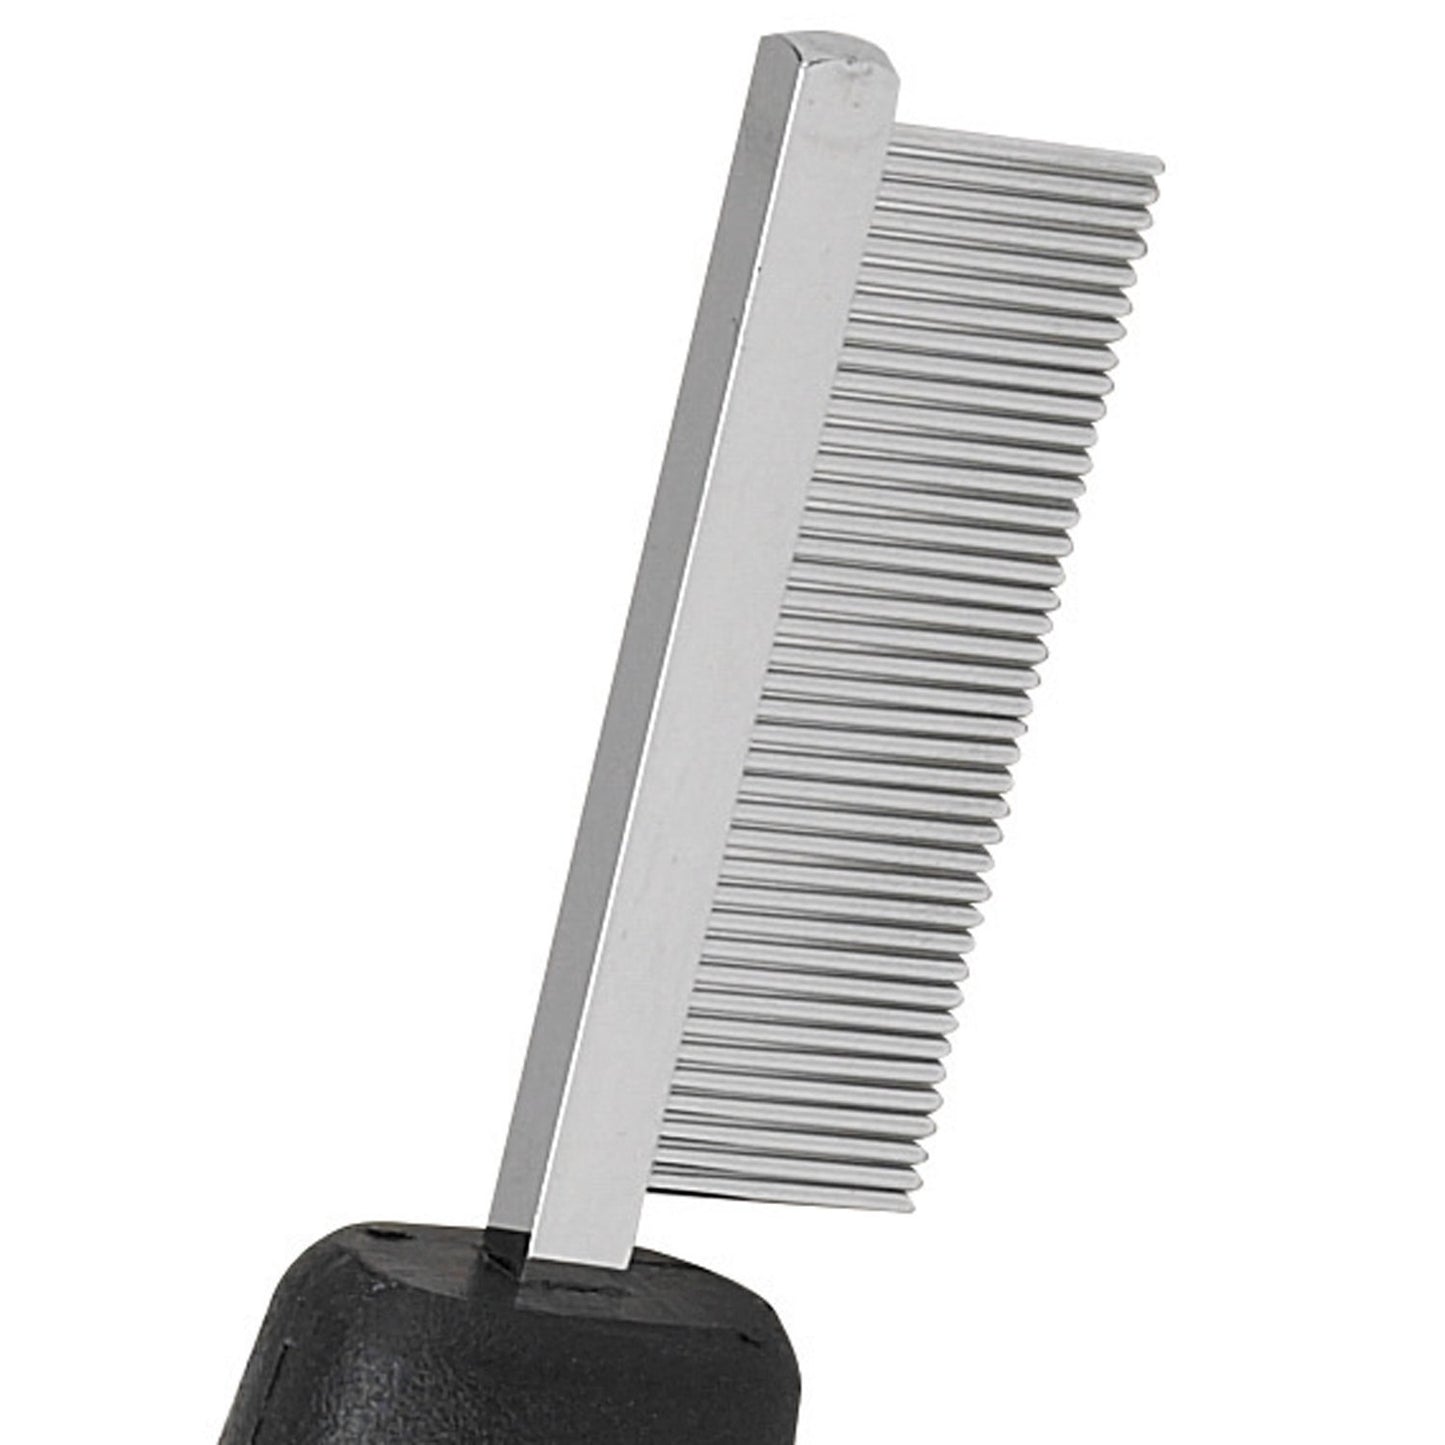 Master Grooming Tools Face & Finishing Combs — Ergonomic Combs for Grooming Dogs, 6¼"